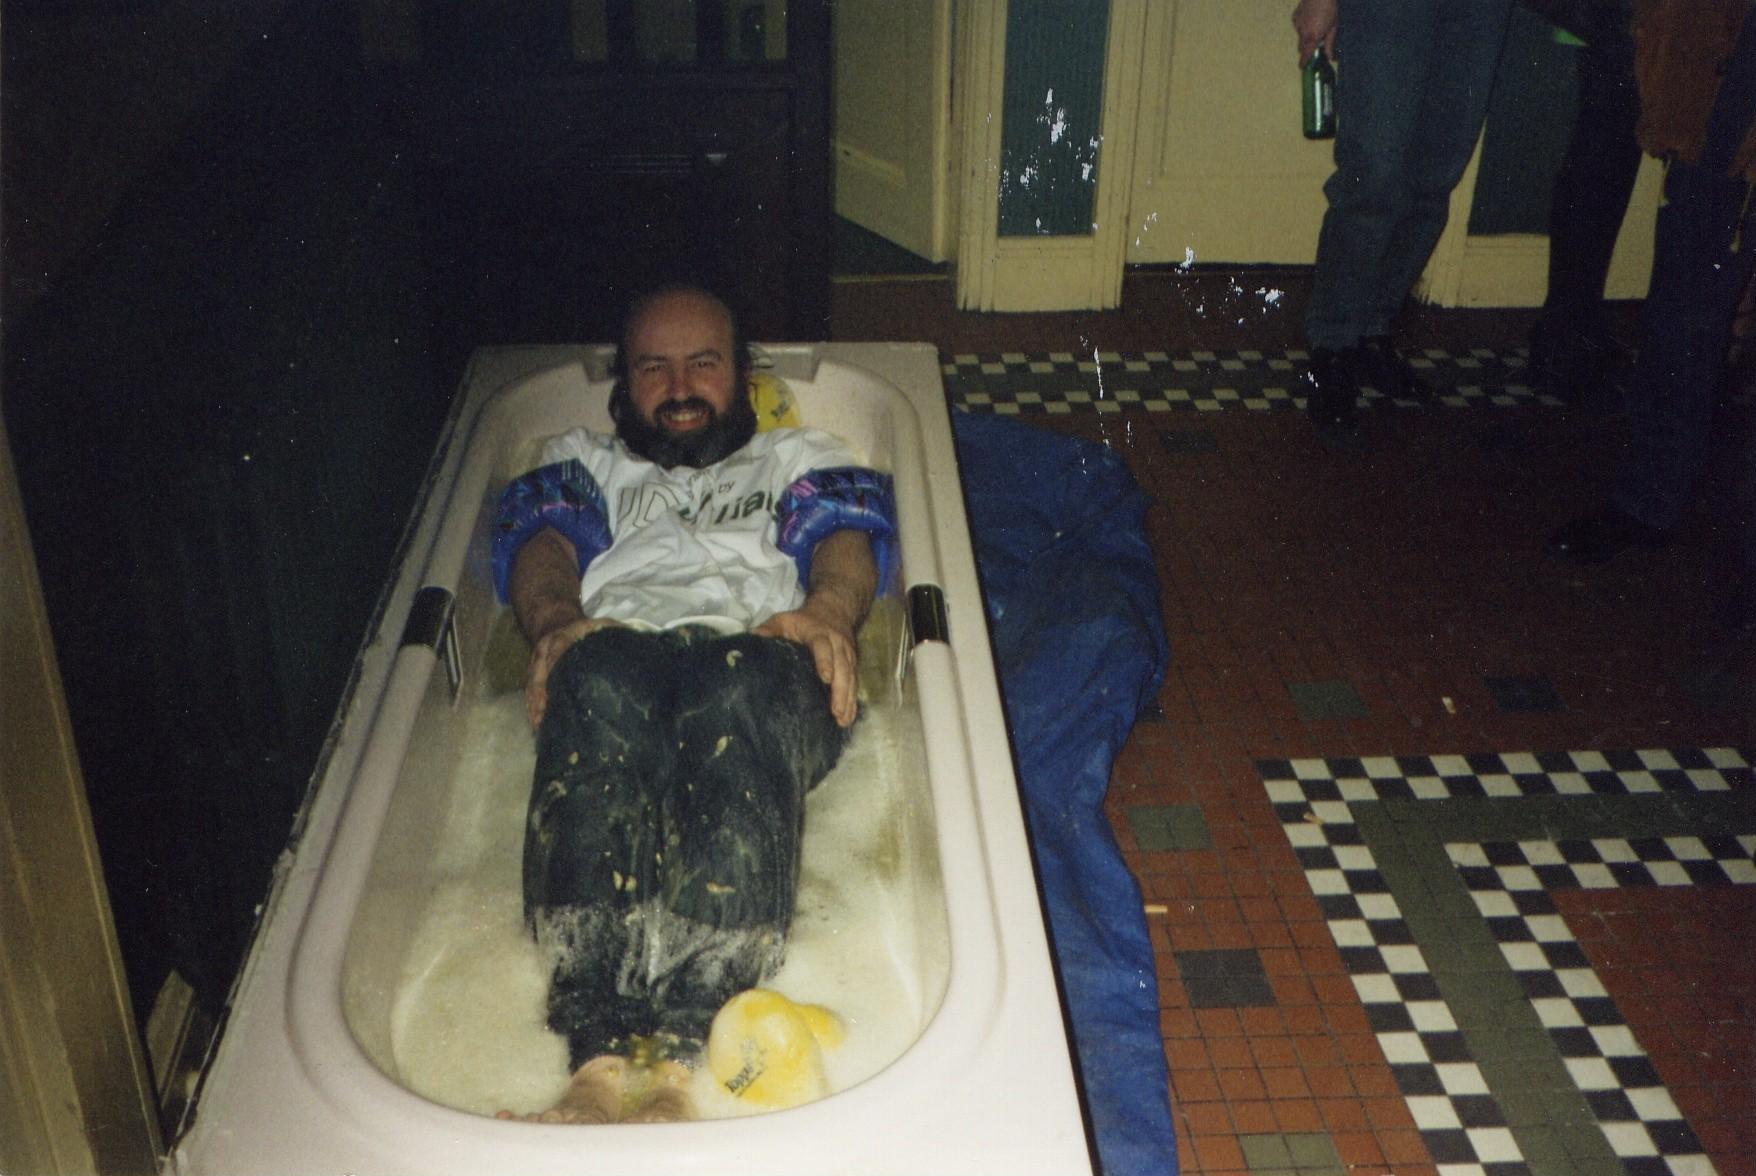 Photo taken by Dave Brock – me in the bath of peas in Manchester 